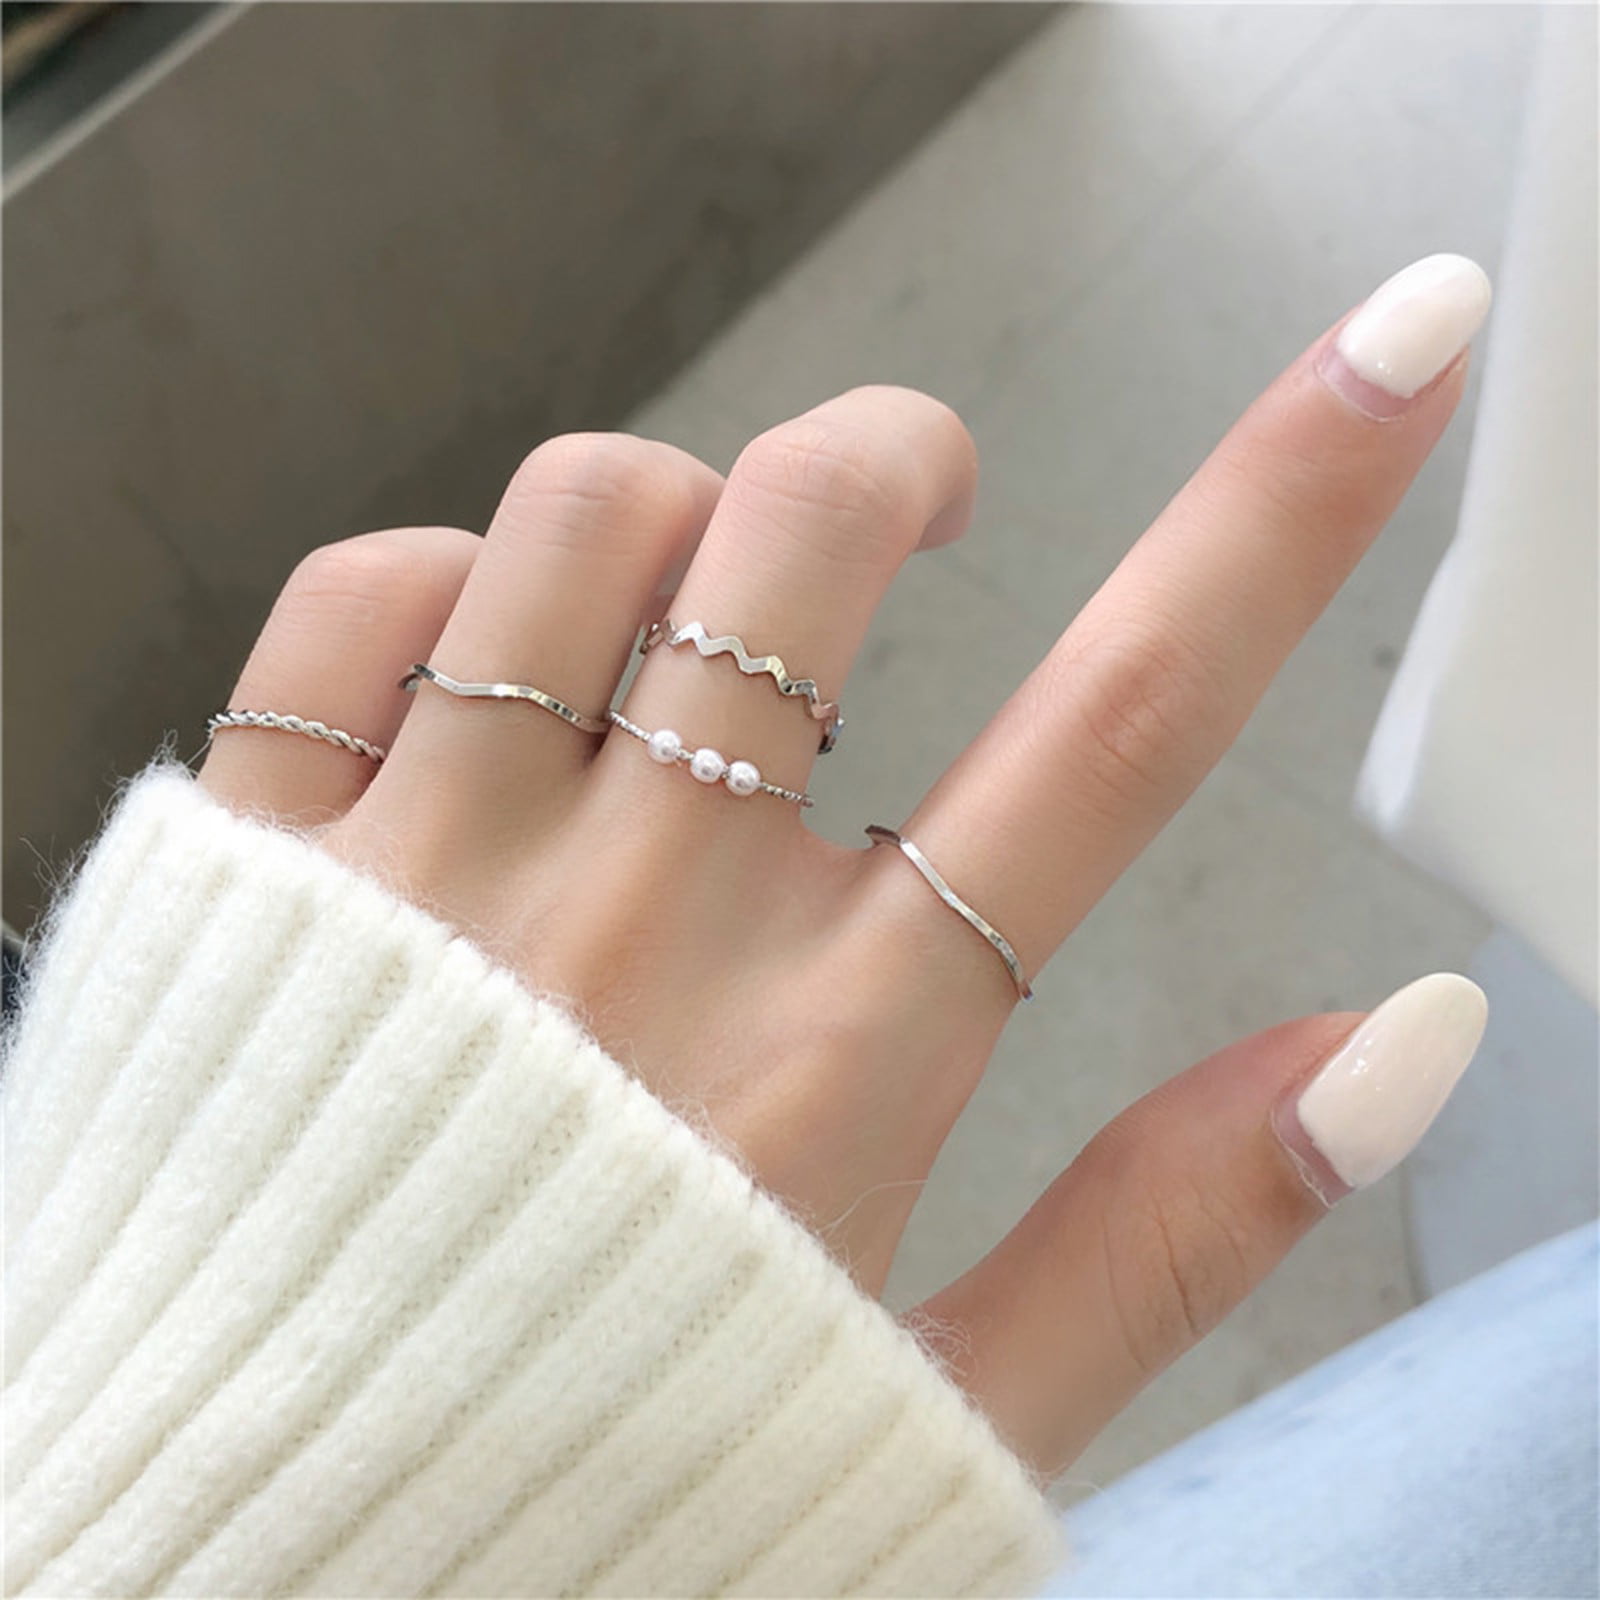 6pc Gold / Silver Stackable Mid Midi Finger Ring Set Size Small boho  beautiful | eBay